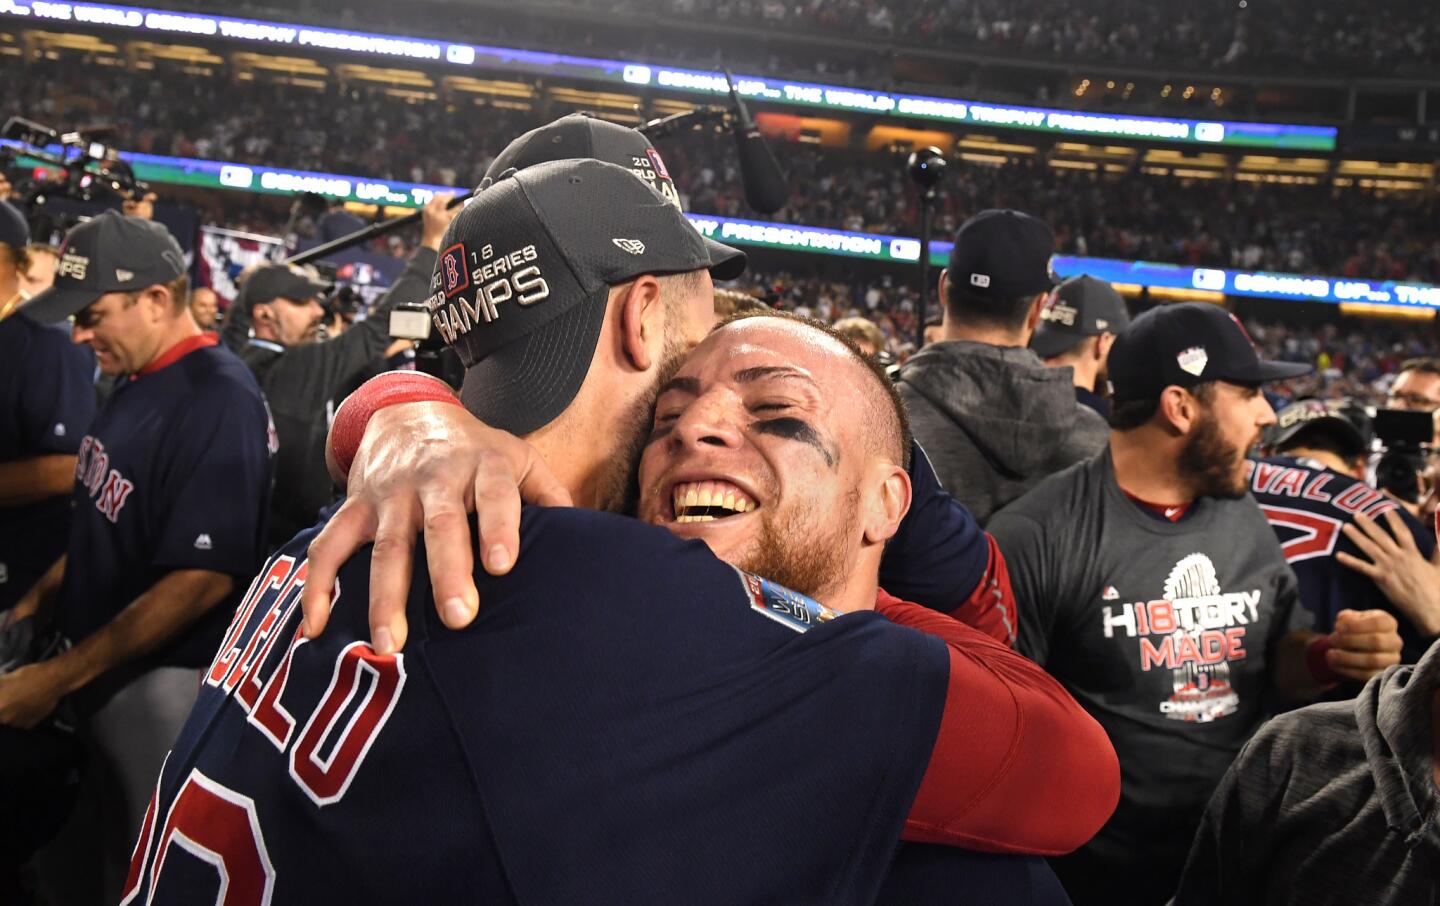 Red Sox pitcher Rick Porcello, left, and catcher Christian Vaszuez hug after winning the championship.